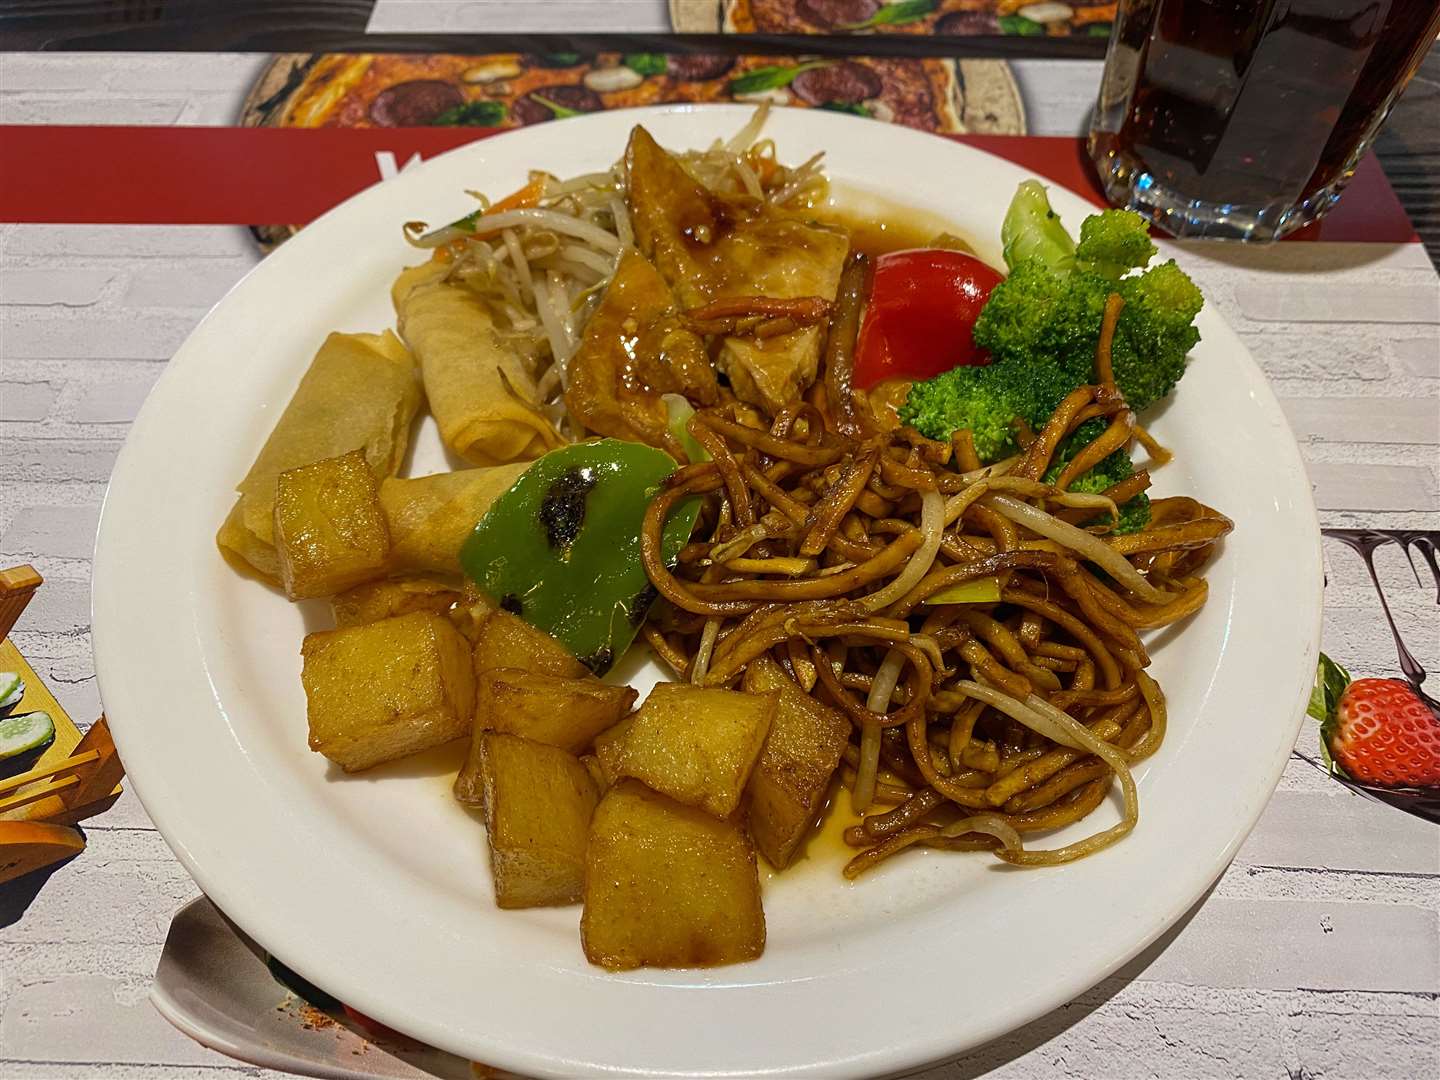 Our first plates included noodles, vegetables, tofu and crispy potatoes, which were hit and miss - lovely noodles and potatoes, but not-so-nice tofu and vegetables . Picture: Sam Lawrie